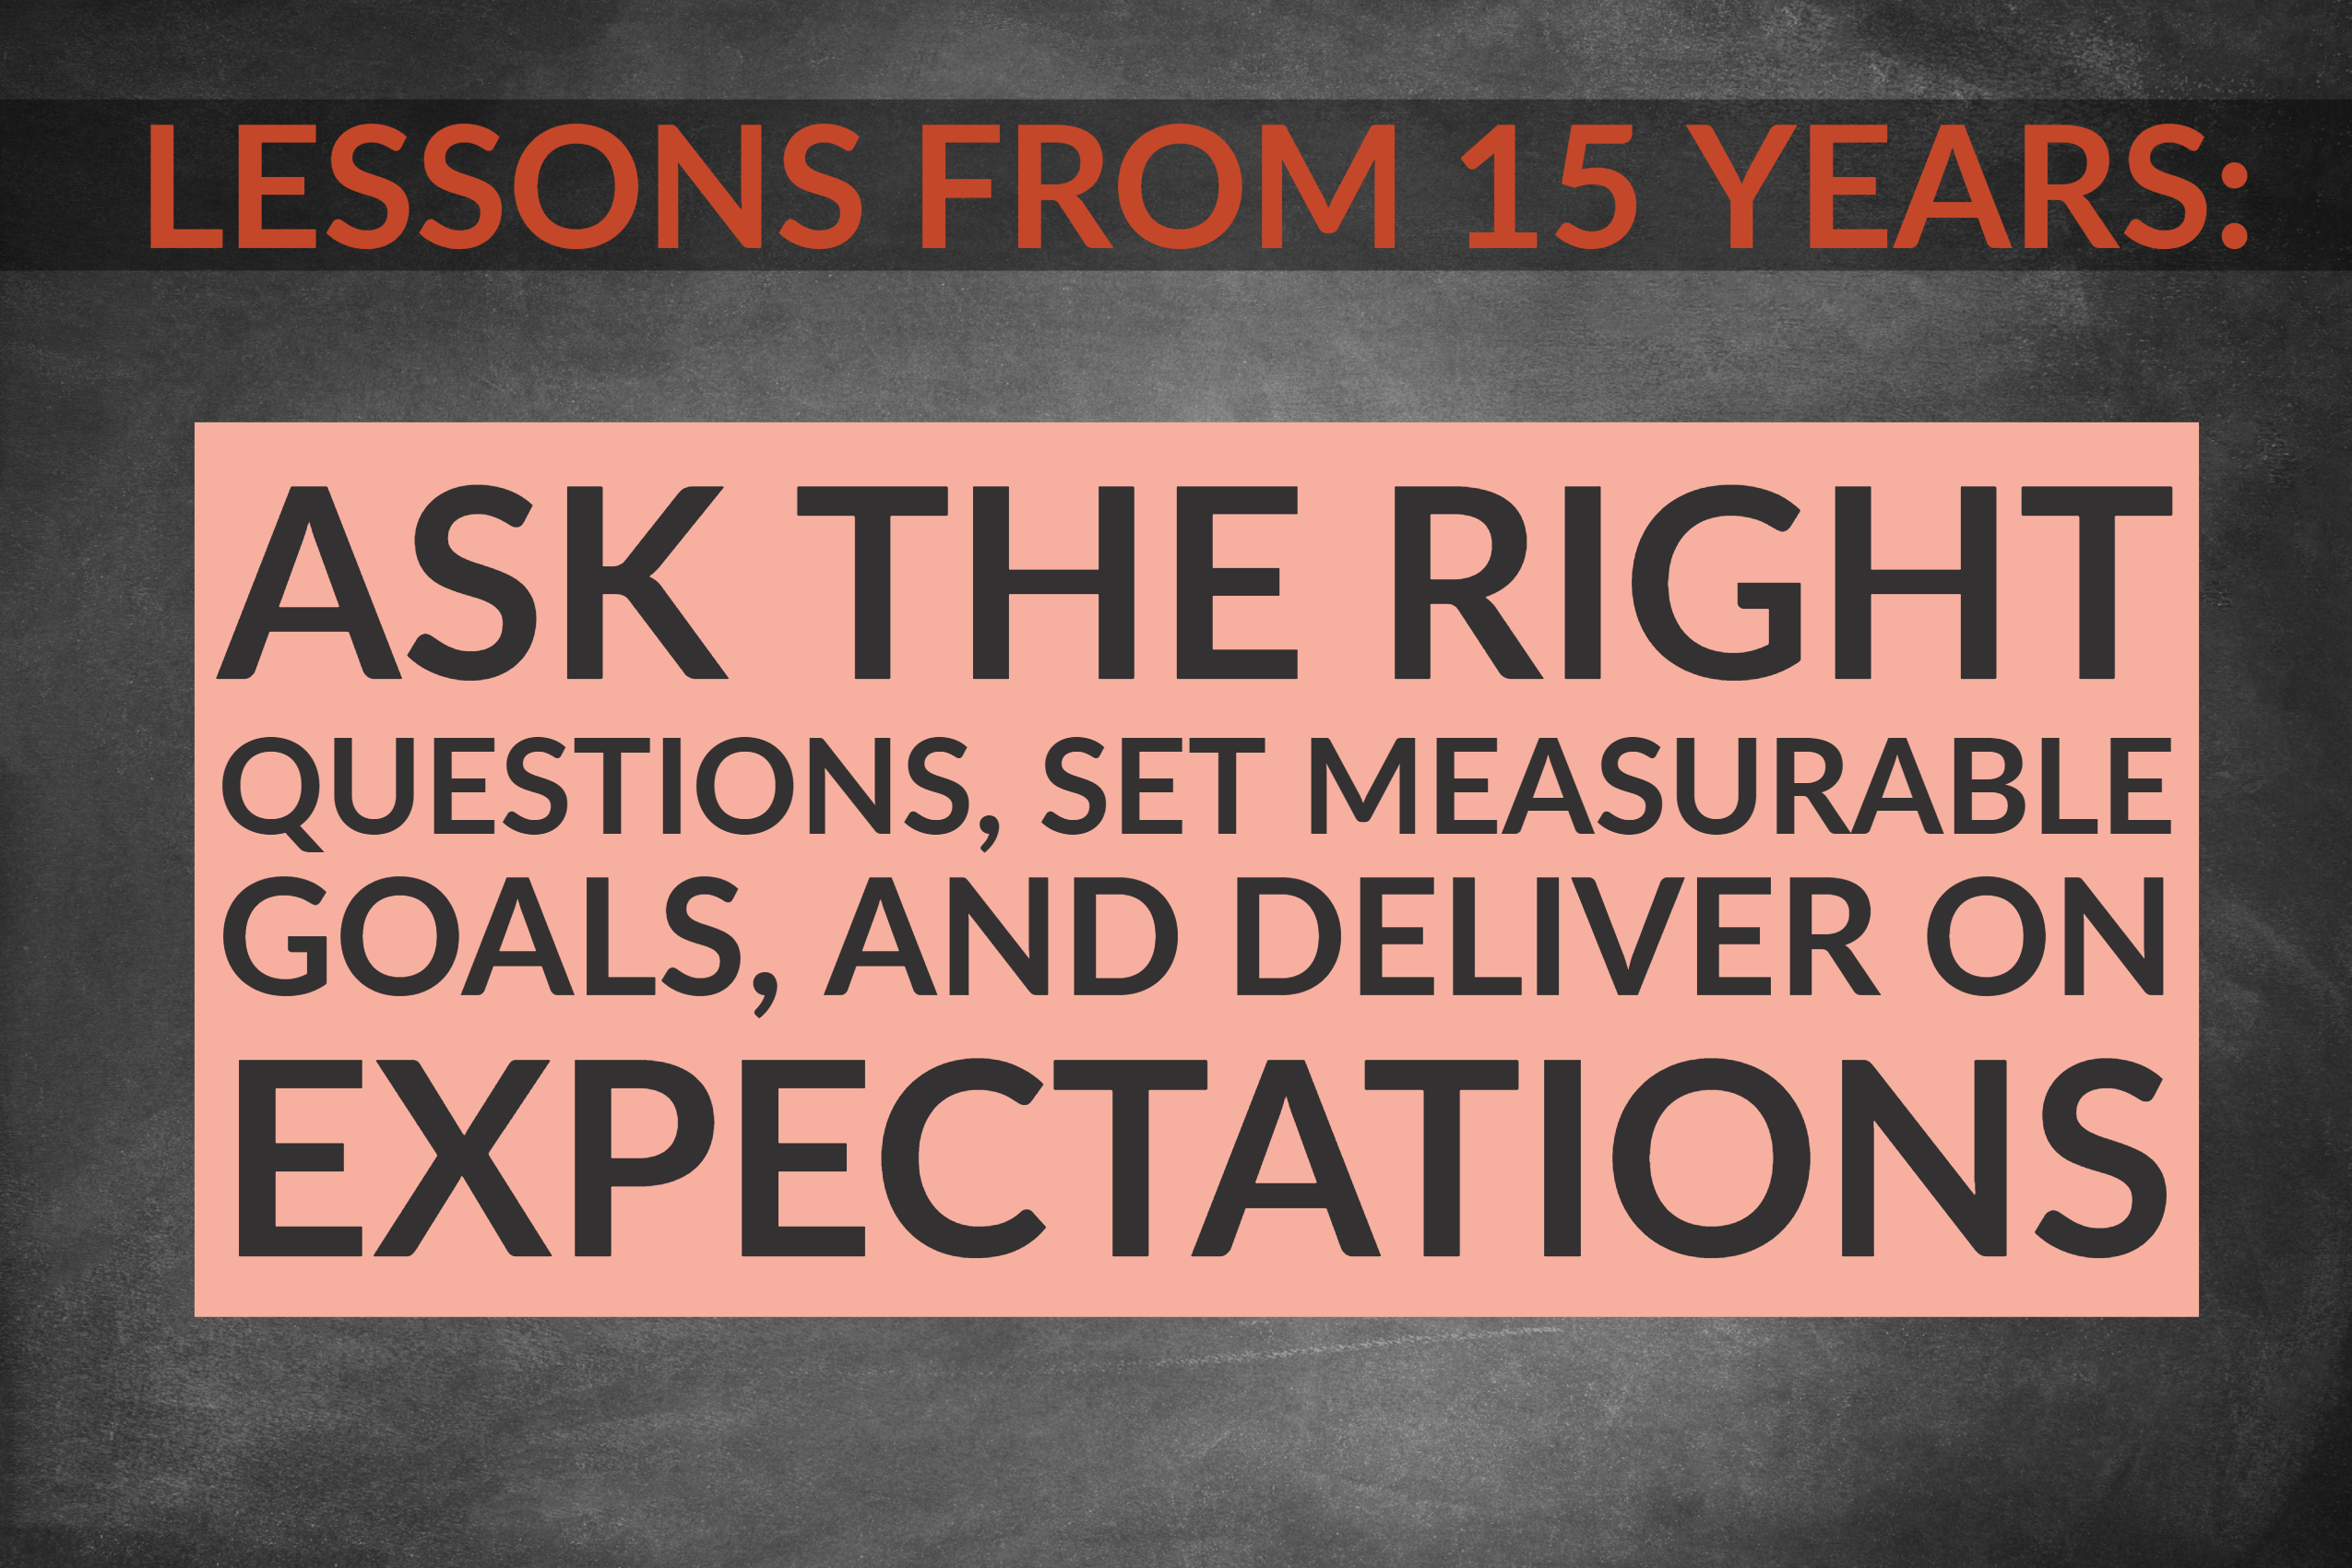 Lessons From 15 Years: Ask The Right Questions, Set Measurable Goals, And Deliver On Expectations